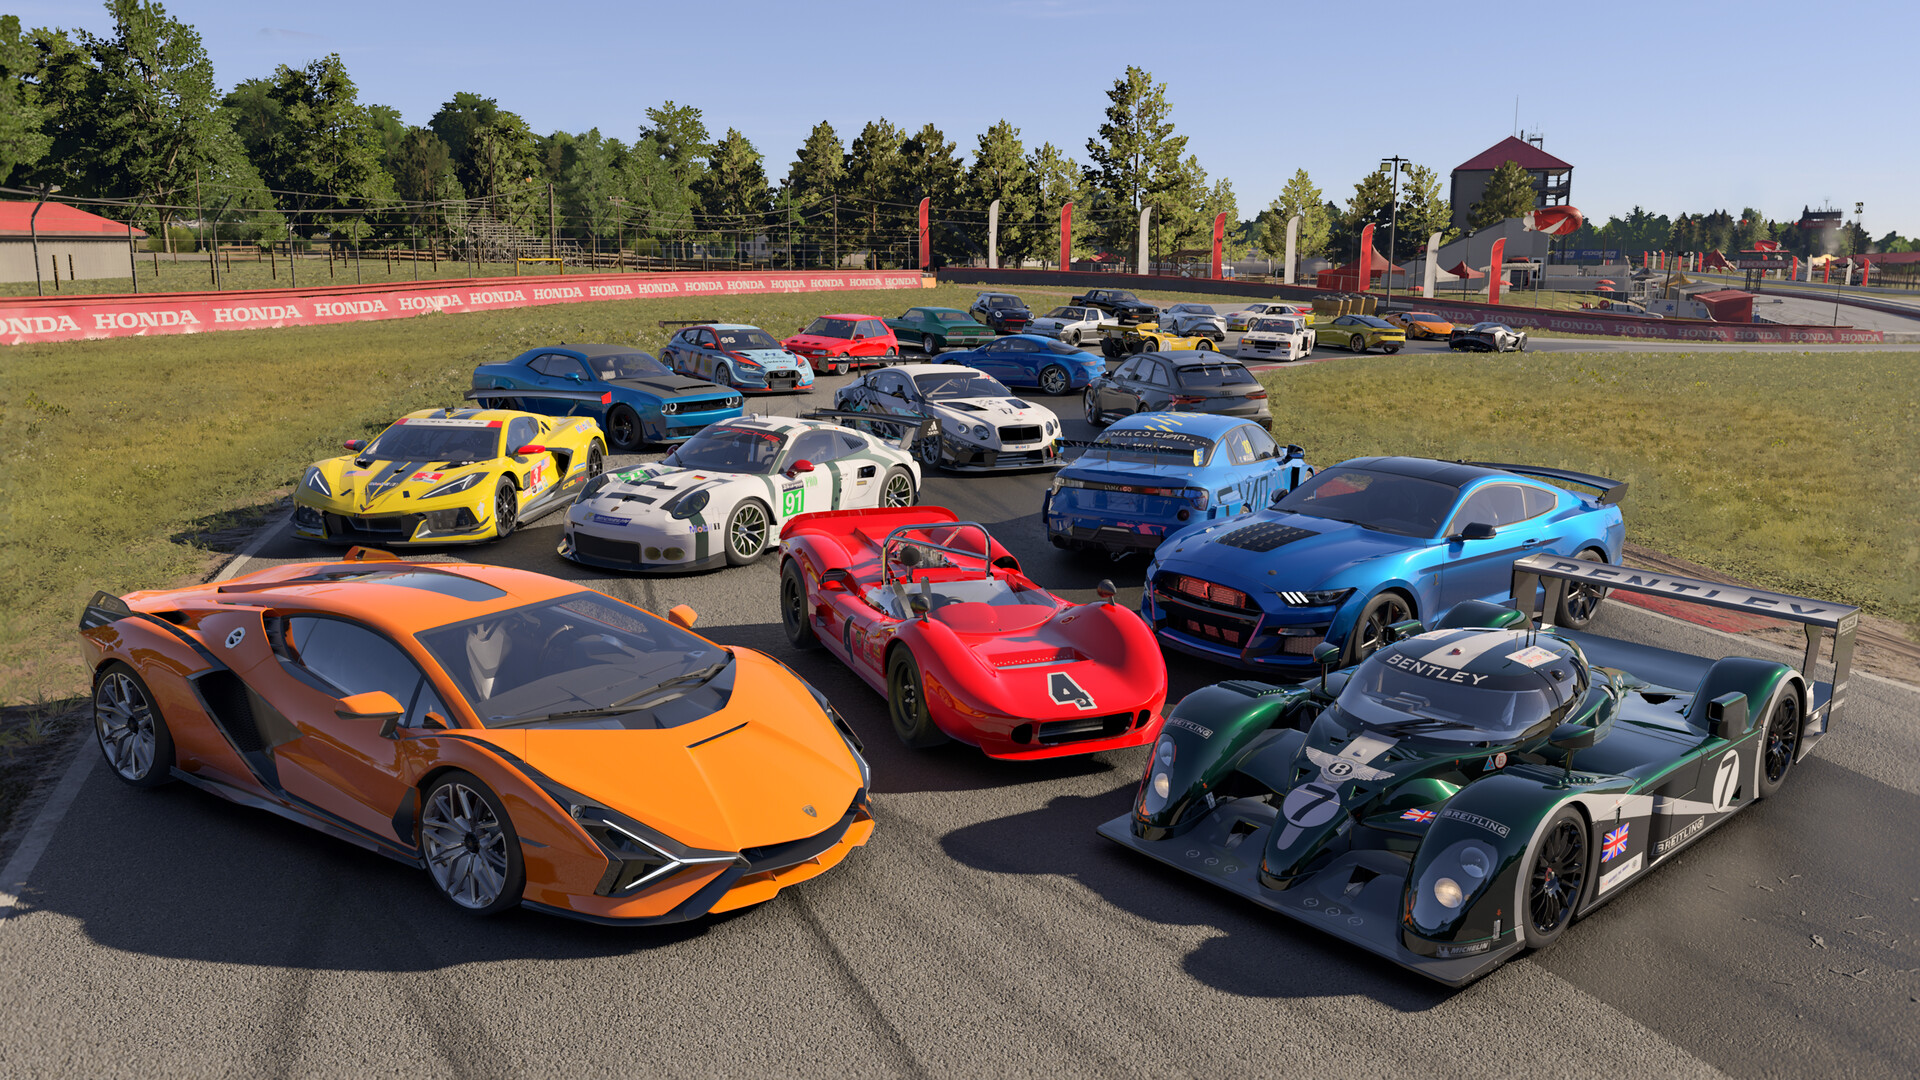 Buy Forza Motorsport 2023 Steam Account Compare Prices